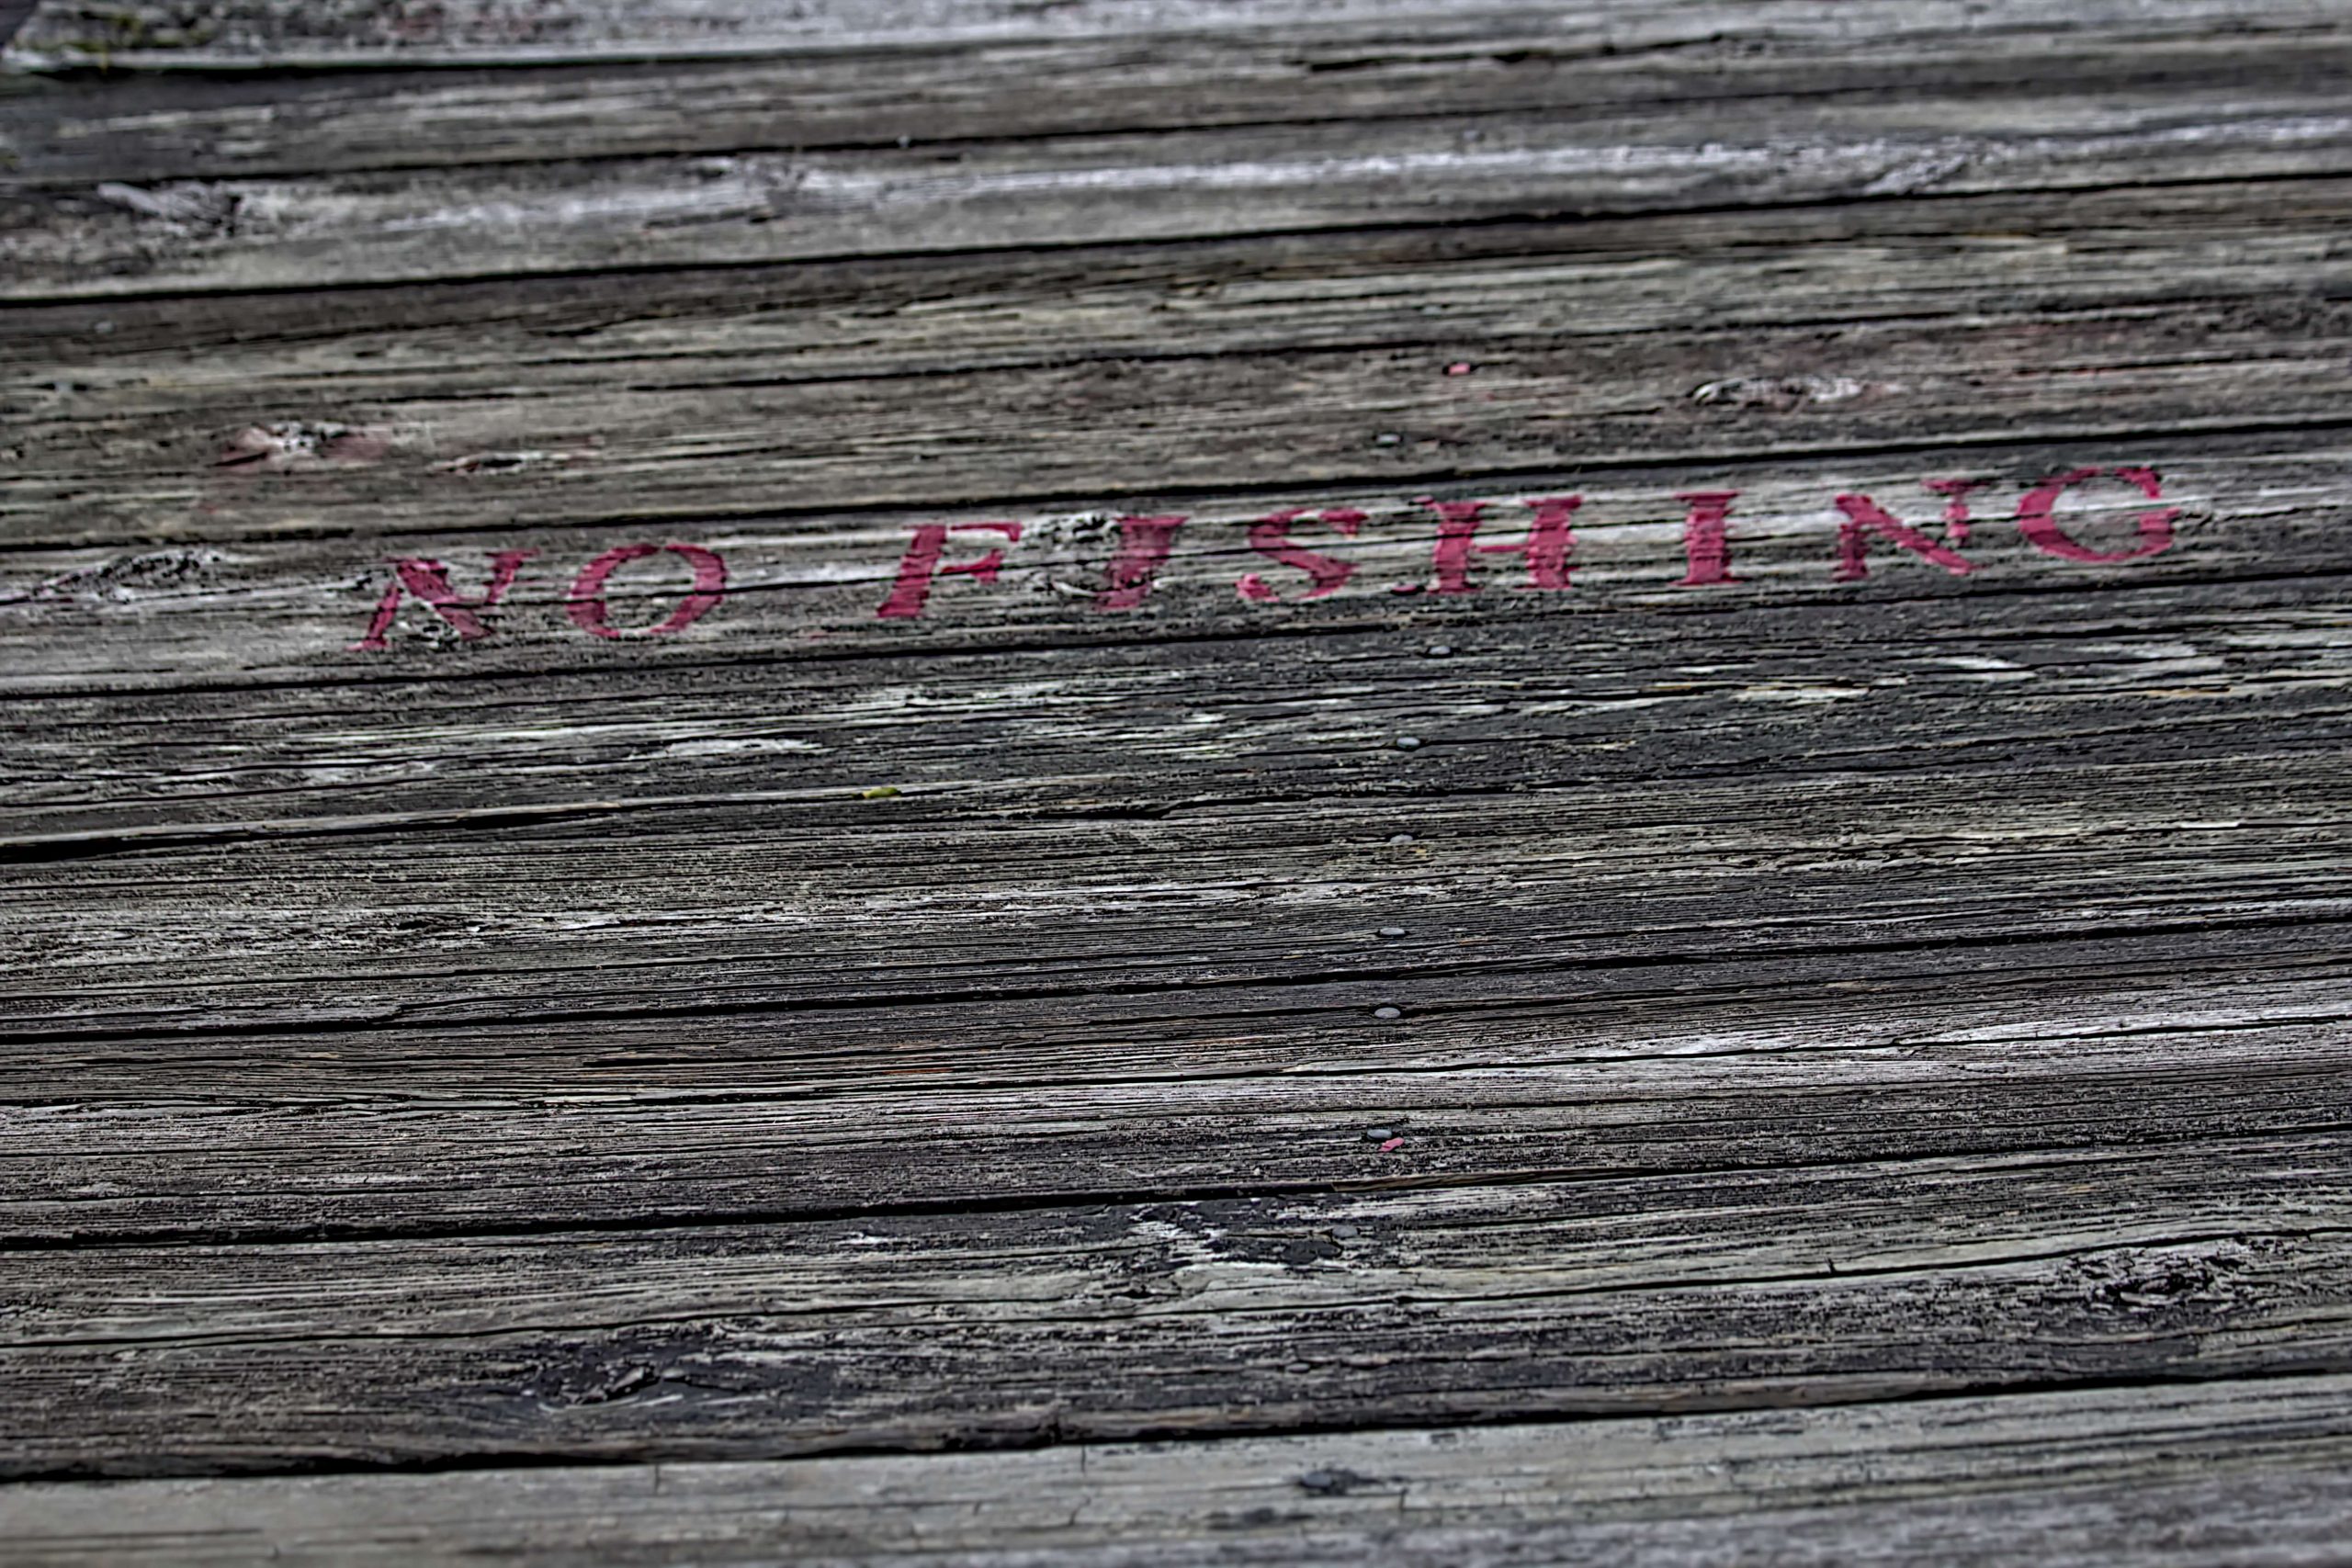 No Fishing from the dock unless you happen to beâ¦